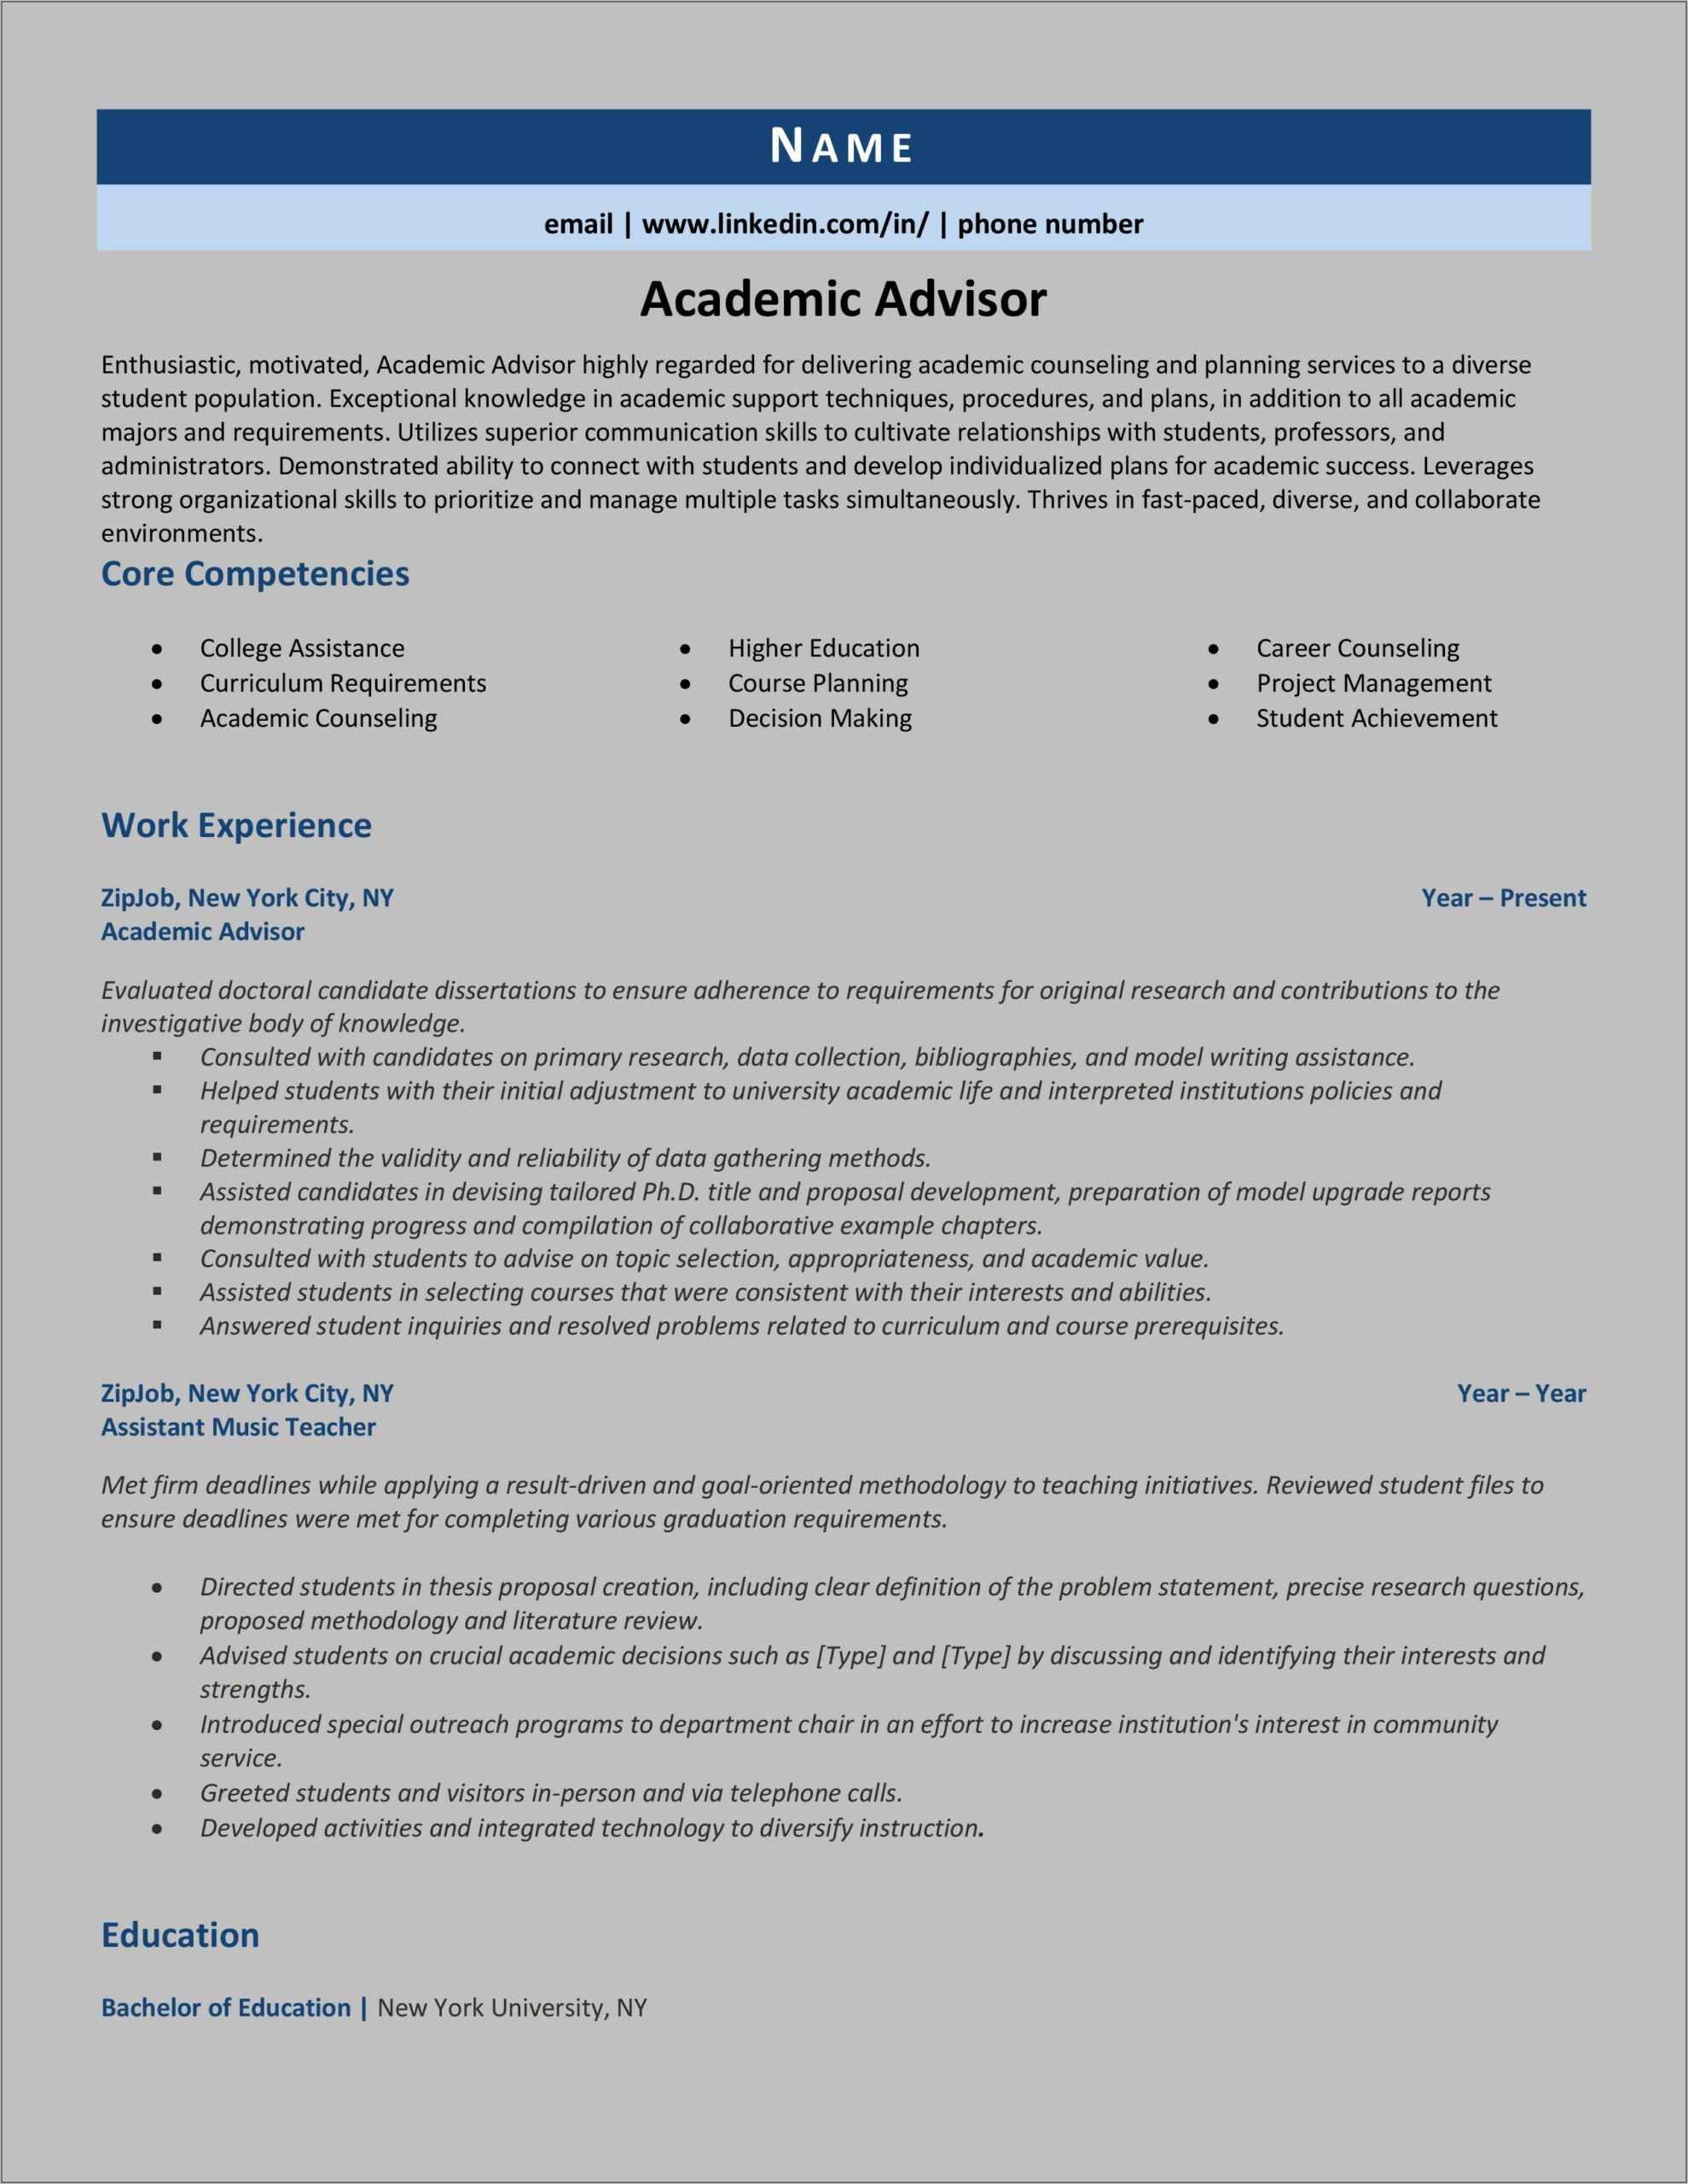 College Career Counselor Resume Sample